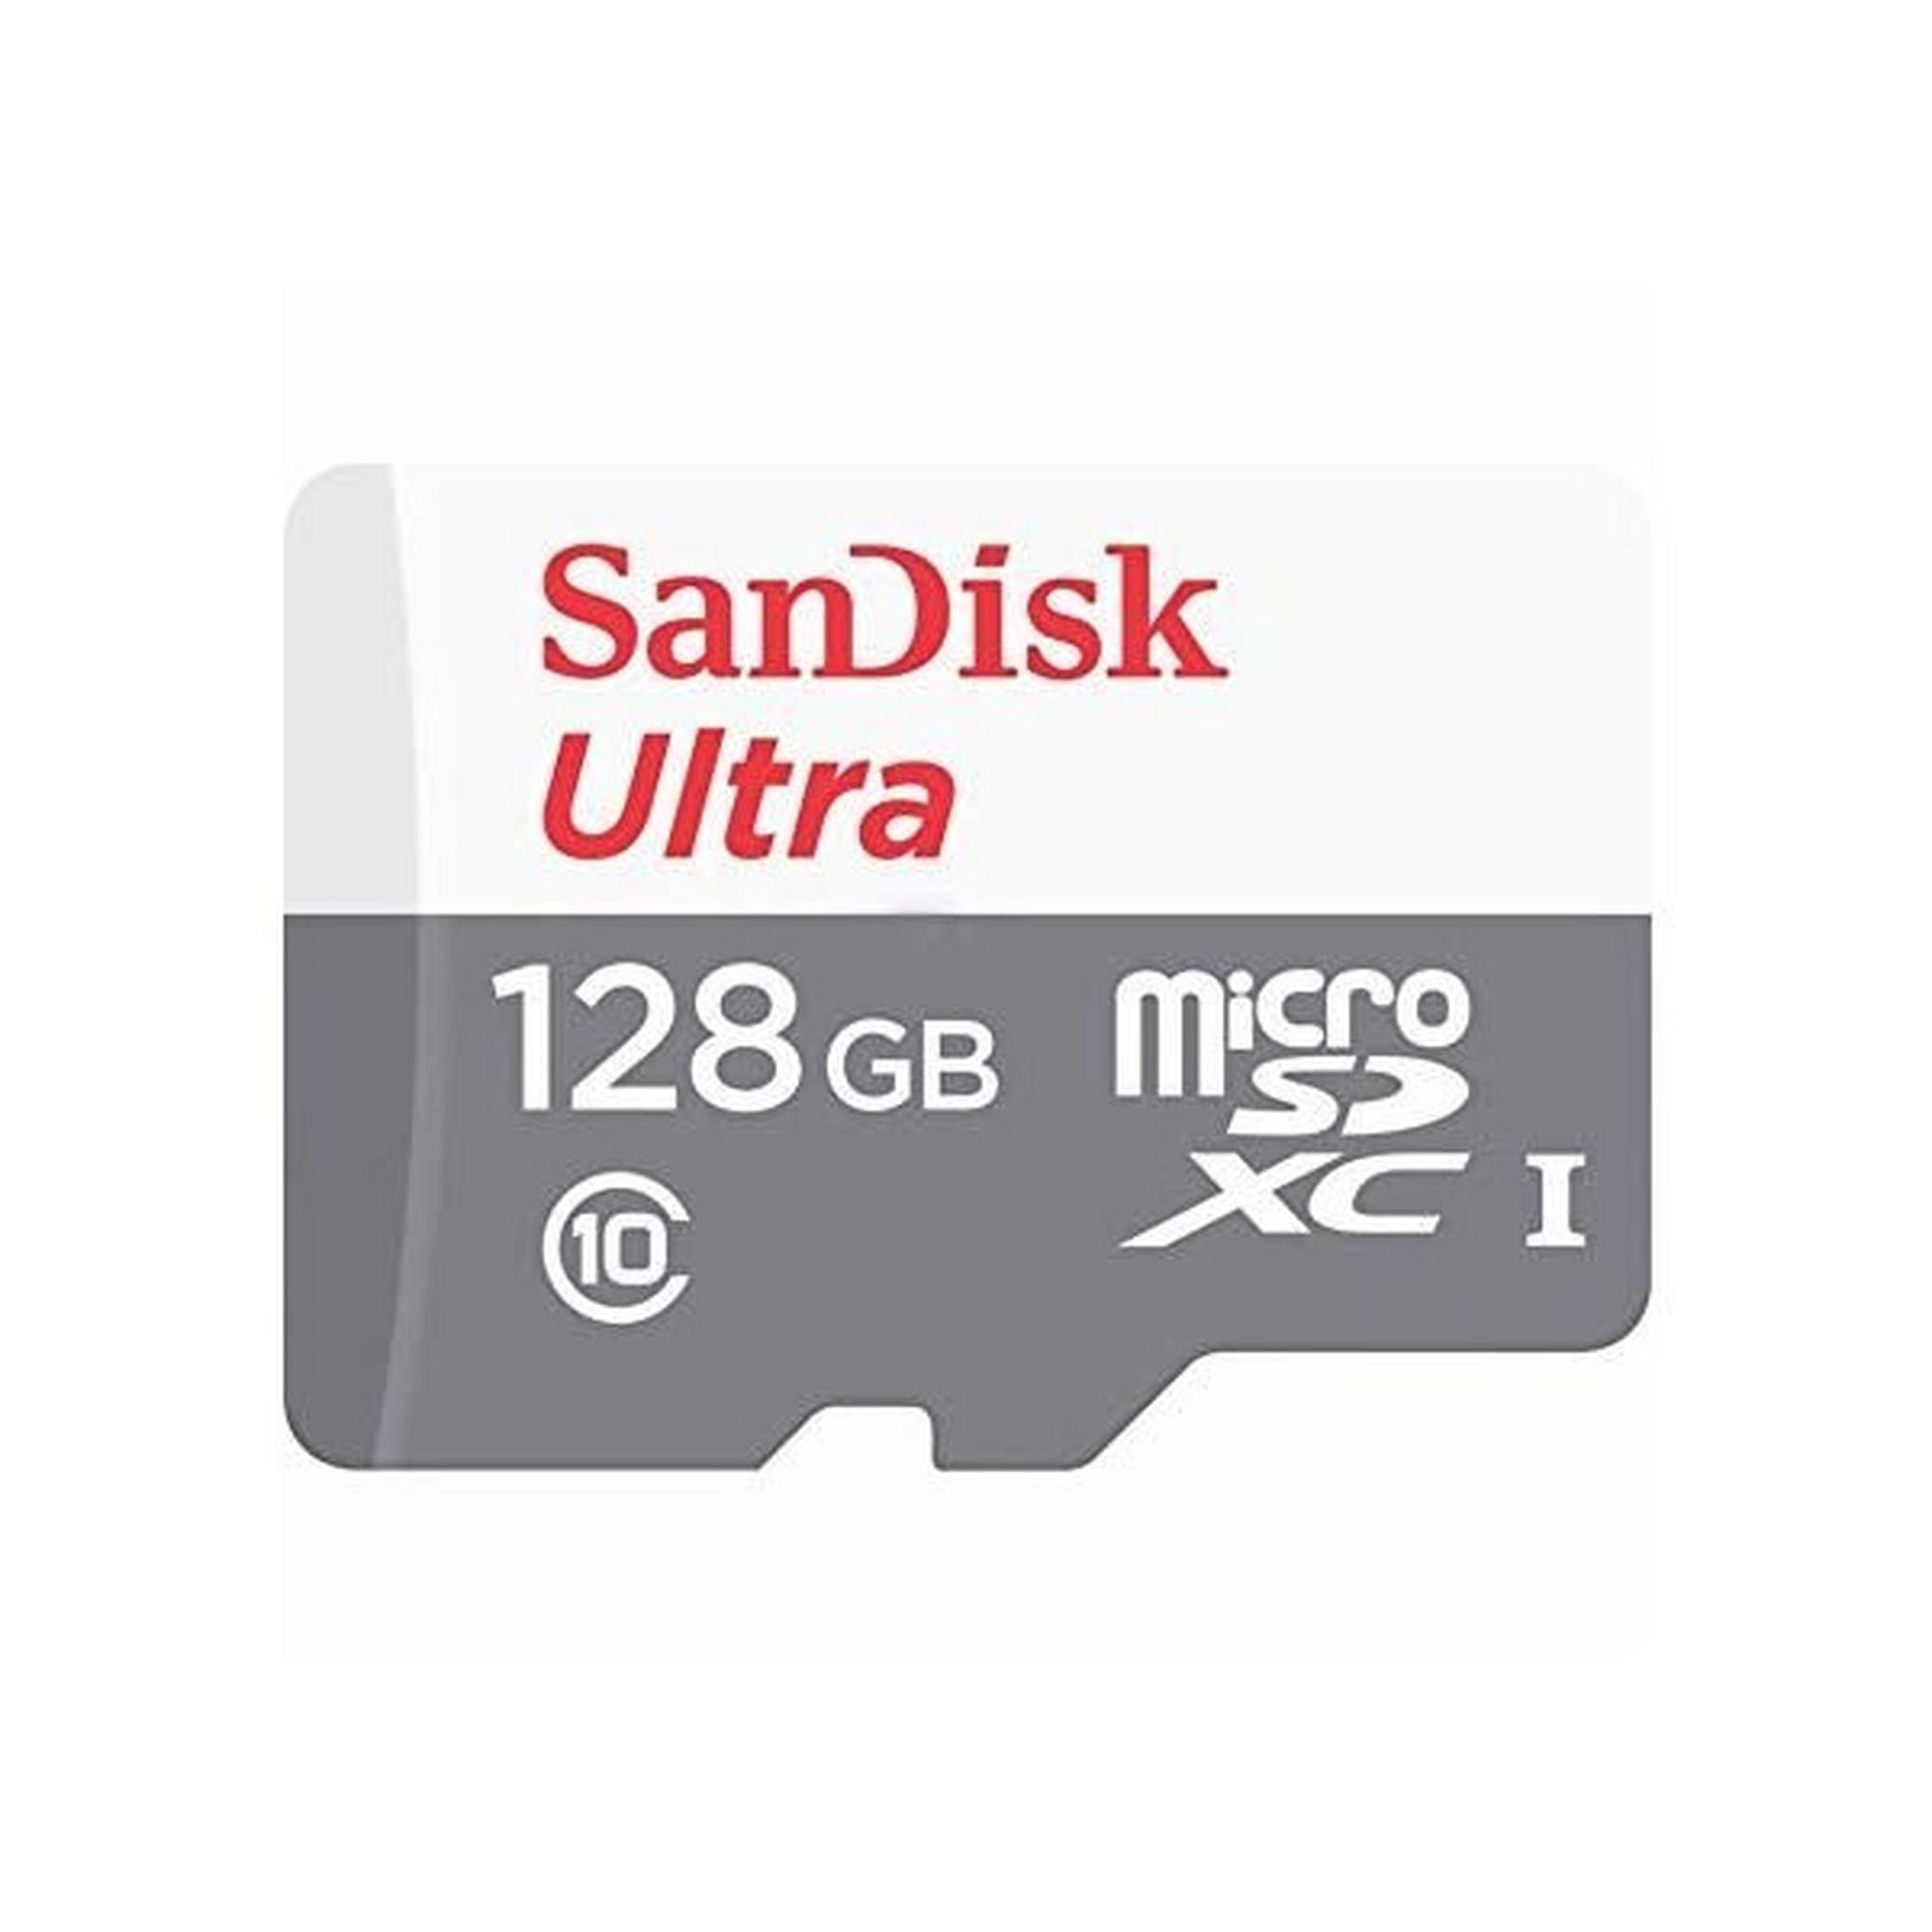 SanDisk Ultra Android UHS-I 128GB MicroSD 80Mb/s Class 10 Card - SDSQUNC-128G-GN6MA